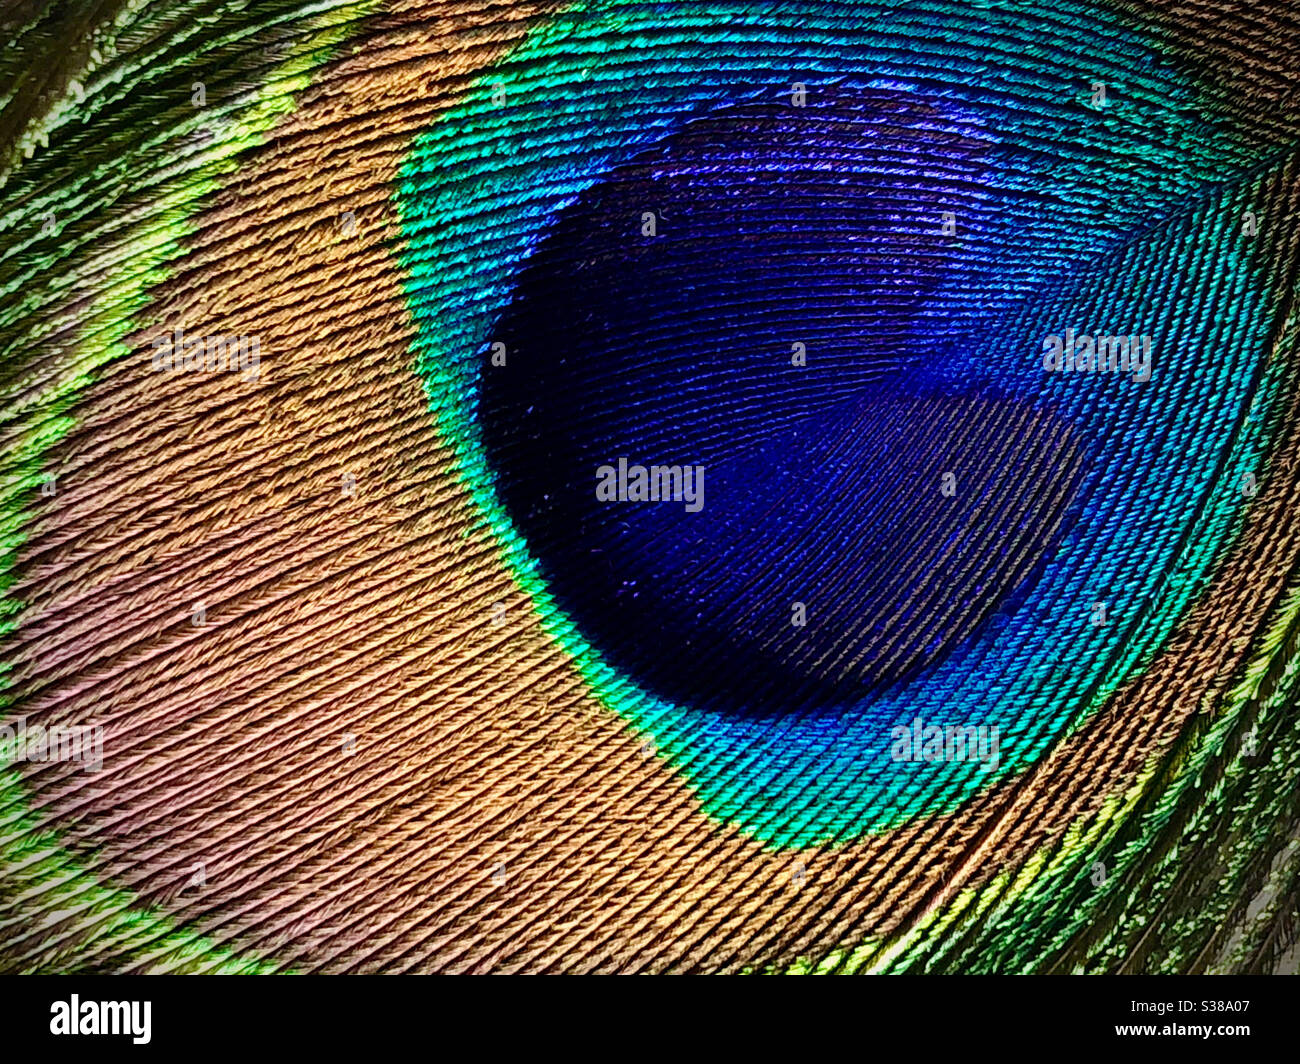 Close up of a single peacock feather Stock Photo